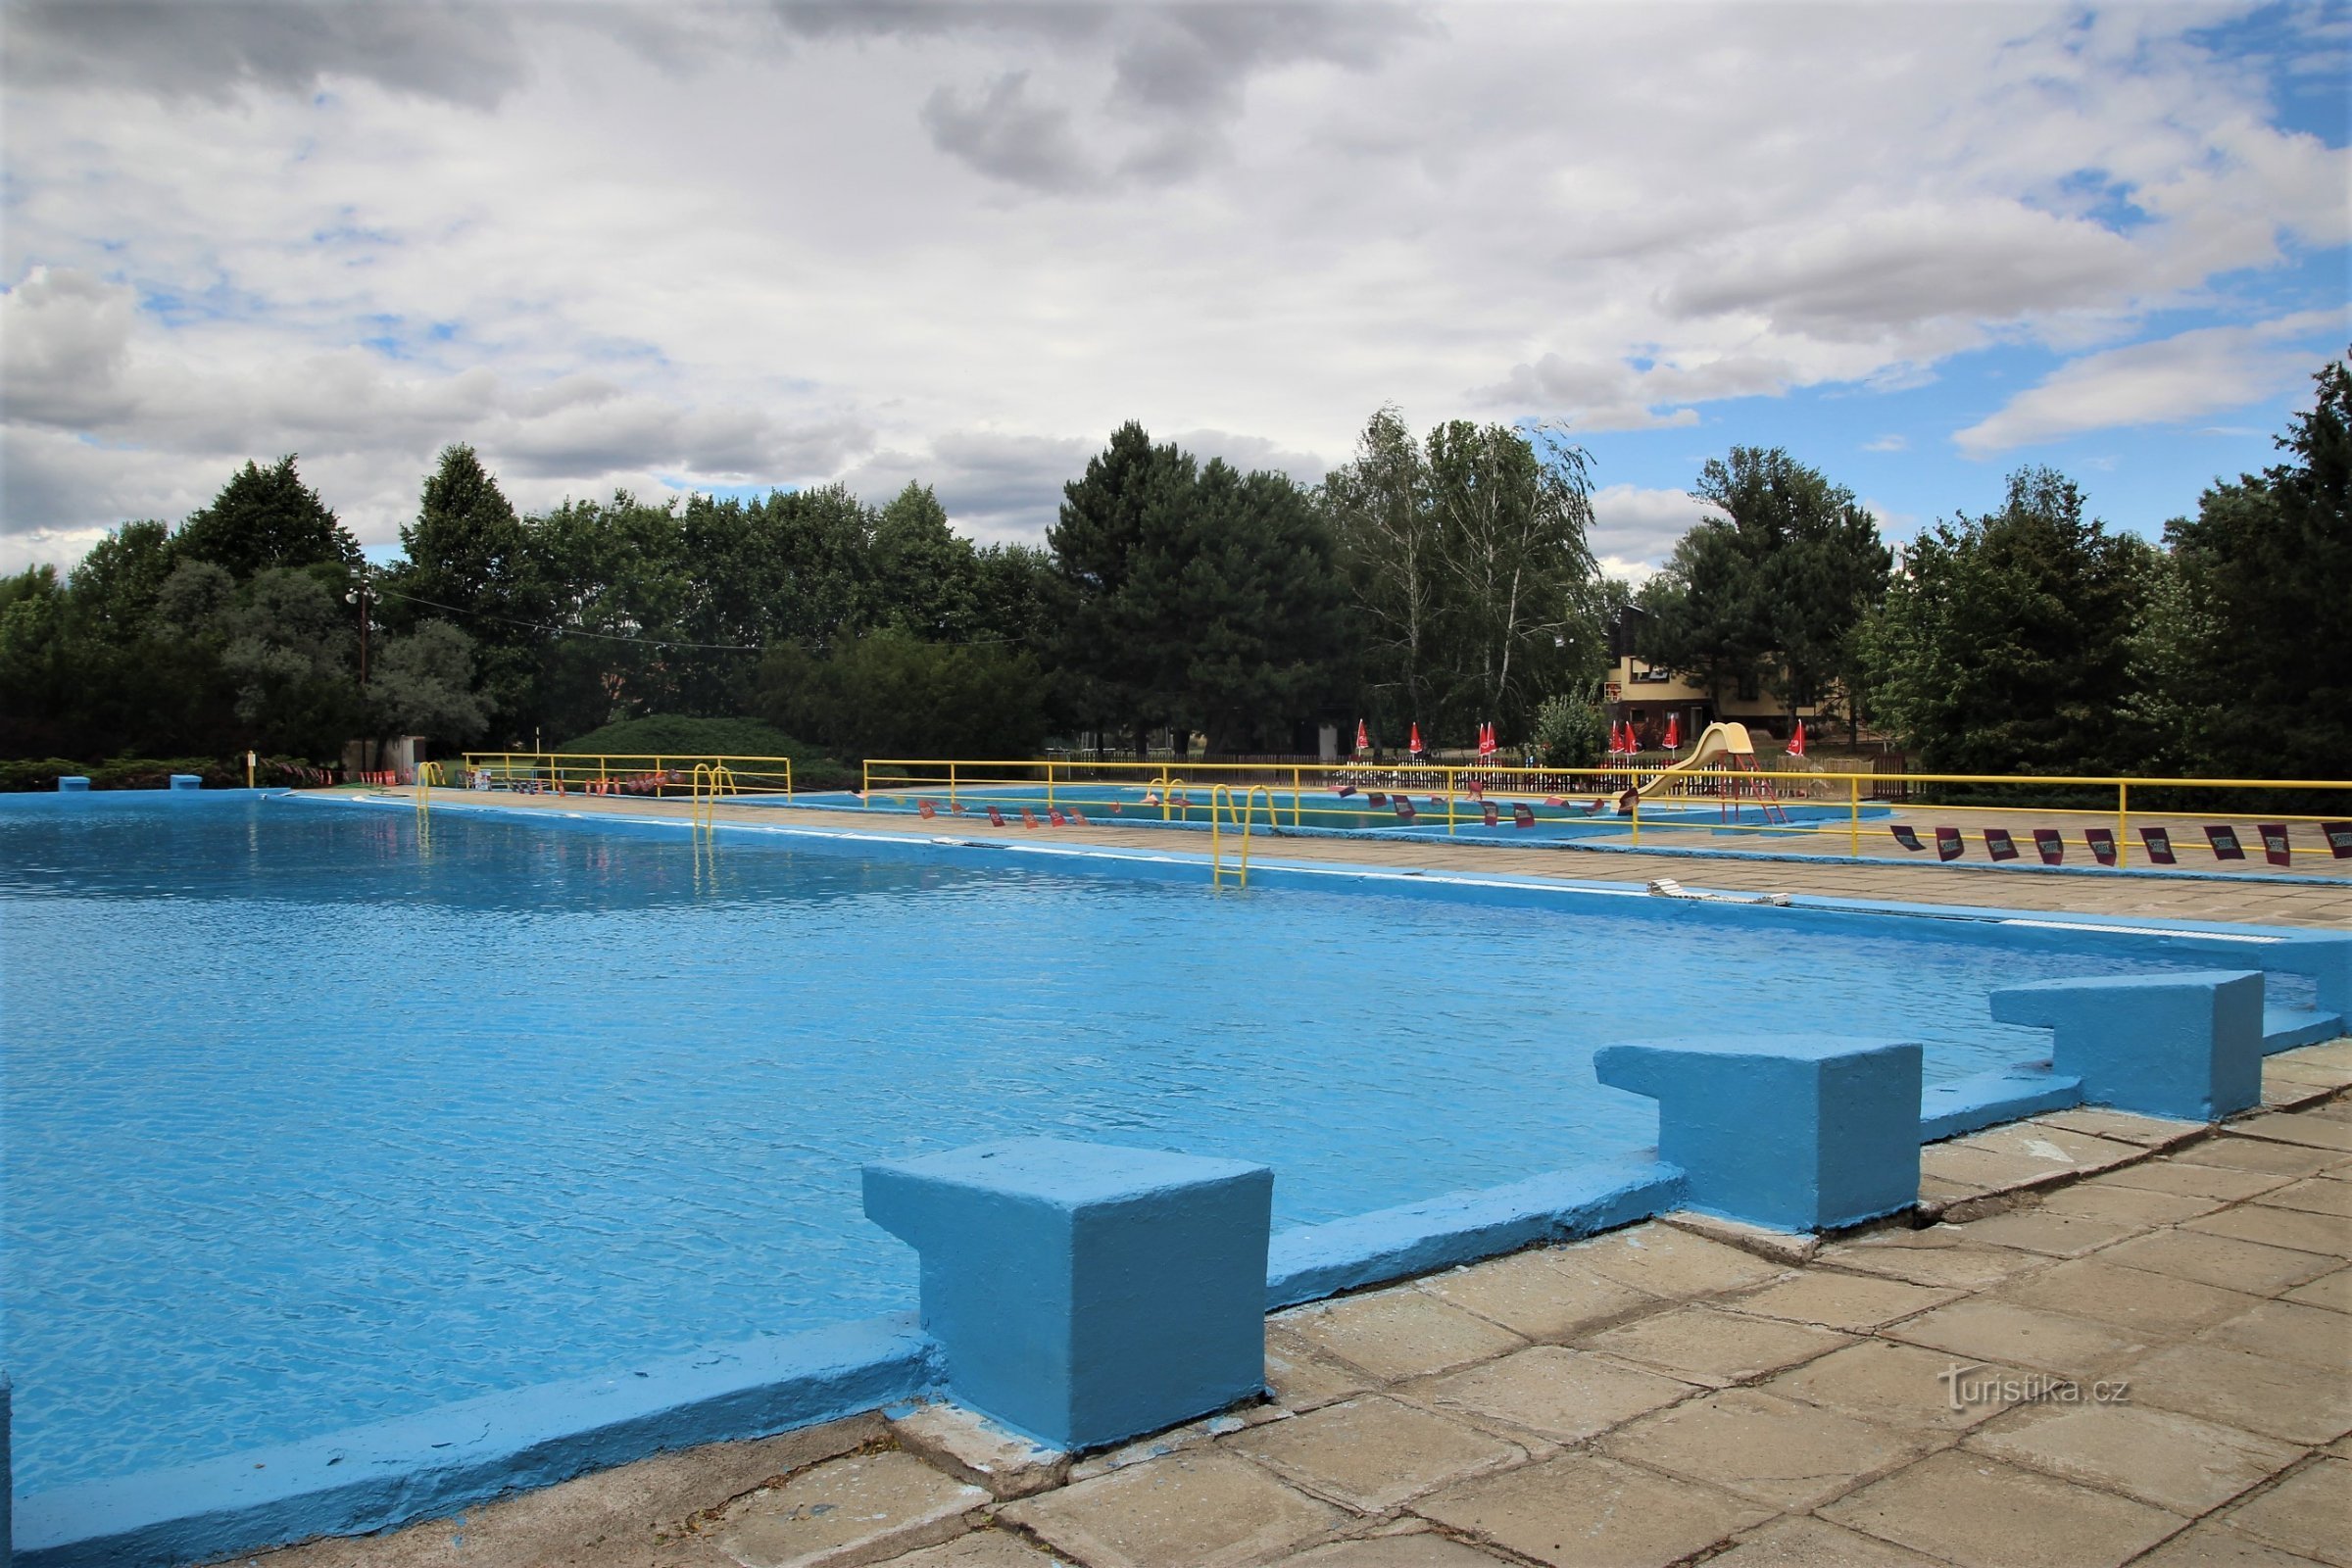 The swimming pool of the town of Židlochovice before opening in June 2017